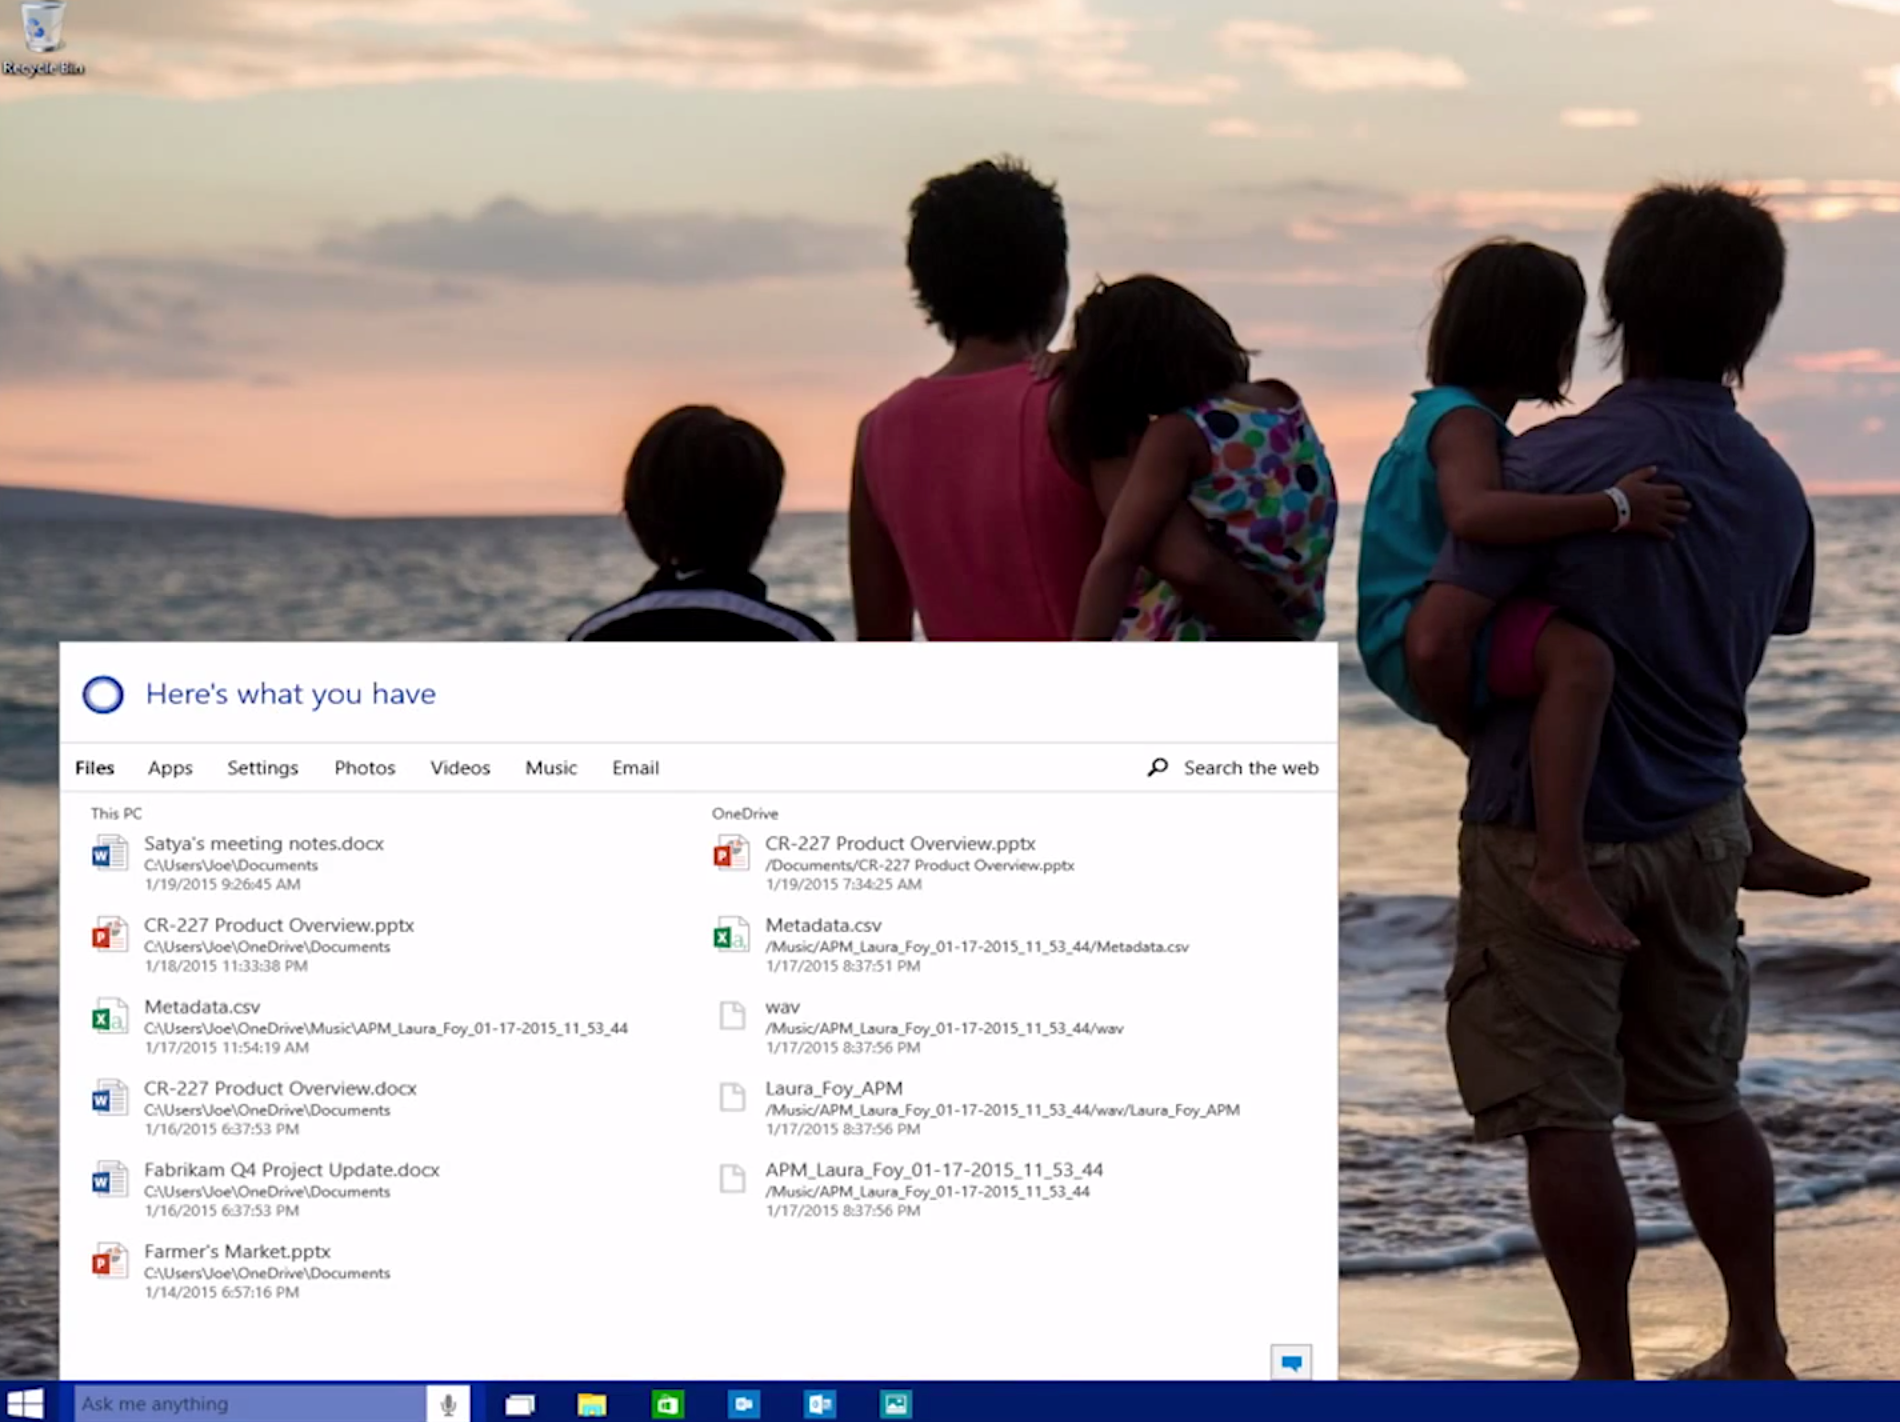 microsoft windows 10 new features cortana universal apps spartan browser and more image 2